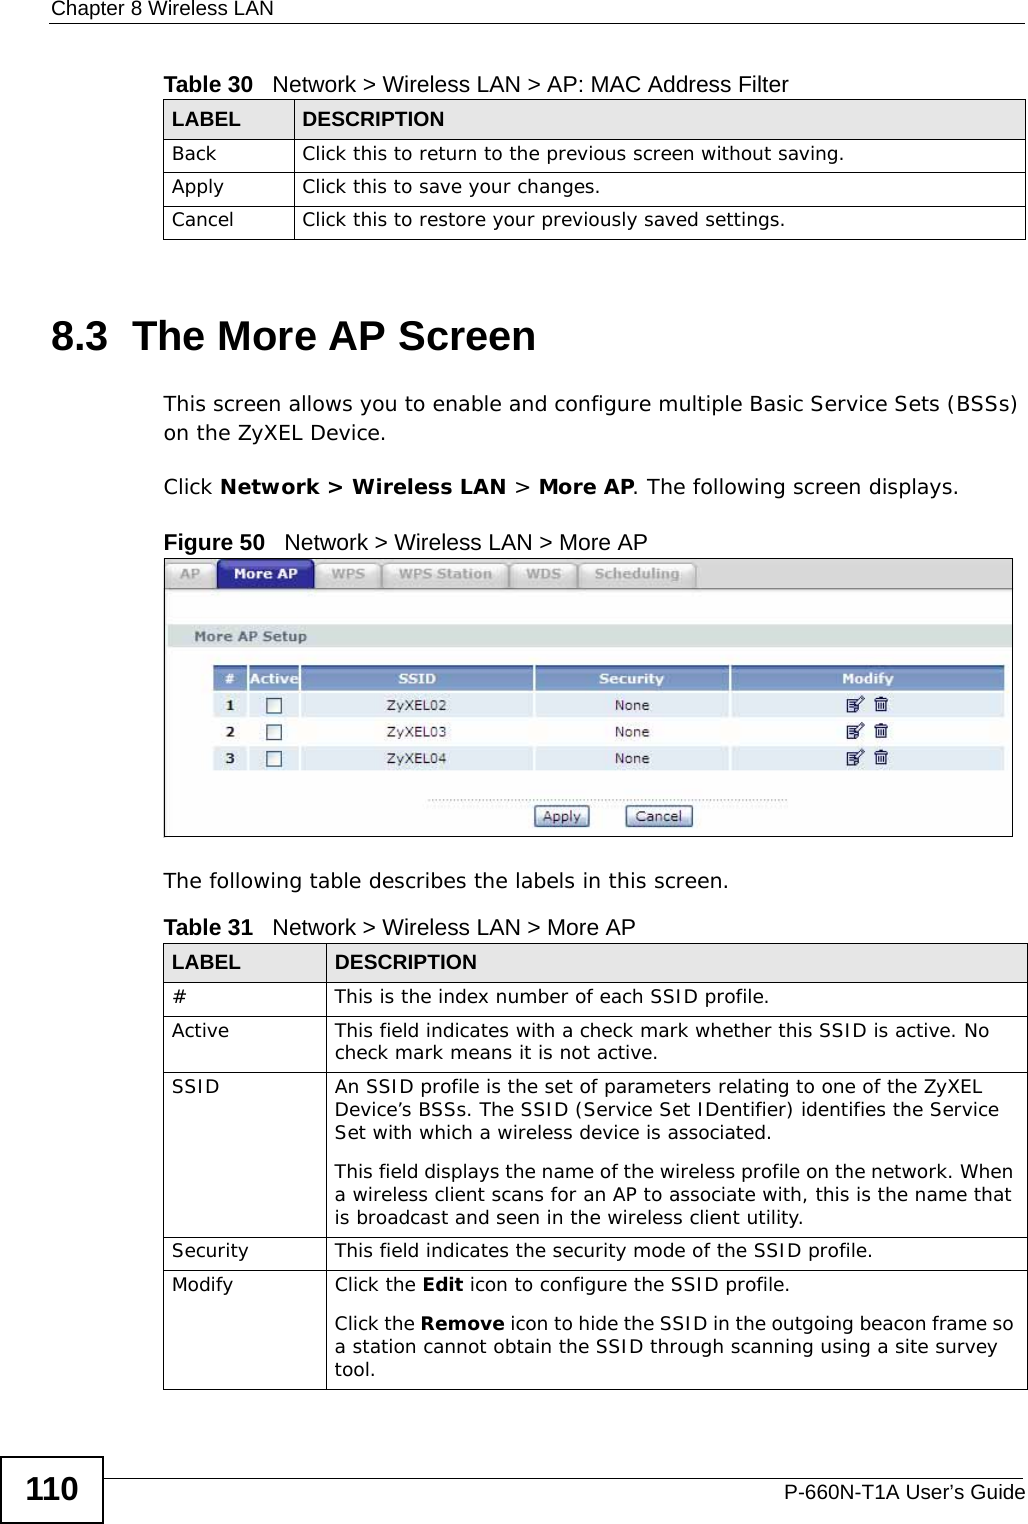 Chapter 8 Wireless LANP-660N-T1A User’s Guide1108.3  The More AP ScreenThis screen allows you to enable and configure multiple Basic Service Sets (BSSs) on the ZyXEL Device.Click Network &gt; Wireless LAN &gt; More AP. The following screen displays.Figure 50   Network &gt; Wireless LAN &gt; More APThe following table describes the labels in this screen.Back Click this to return to the previous screen without saving.Apply Click this to save your changes.Cancel Click this to restore your previously saved settings.Table 30   Network &gt; Wireless LAN &gt; AP: MAC Address FilterLABEL DESCRIPTIONTable 31   Network &gt; Wireless LAN &gt; More APLABEL DESCRIPTION# This is the index number of each SSID profile. Active This field indicates with a check mark whether this SSID is active. No check mark means it is not active.SSID An SSID profile is the set of parameters relating to one of the ZyXEL Device’s BSSs. The SSID (Service Set IDentifier) identifies the Service Set with which a wireless device is associated. This field displays the name of the wireless profile on the network. When a wireless client scans for an AP to associate with, this is the name that is broadcast and seen in the wireless client utility.Security This field indicates the security mode of the SSID profile.Modify Click the Edit icon to configure the SSID profile.Click the Remove icon to hide the SSID in the outgoing beacon frame so a station cannot obtain the SSID through scanning using a site survey tool.